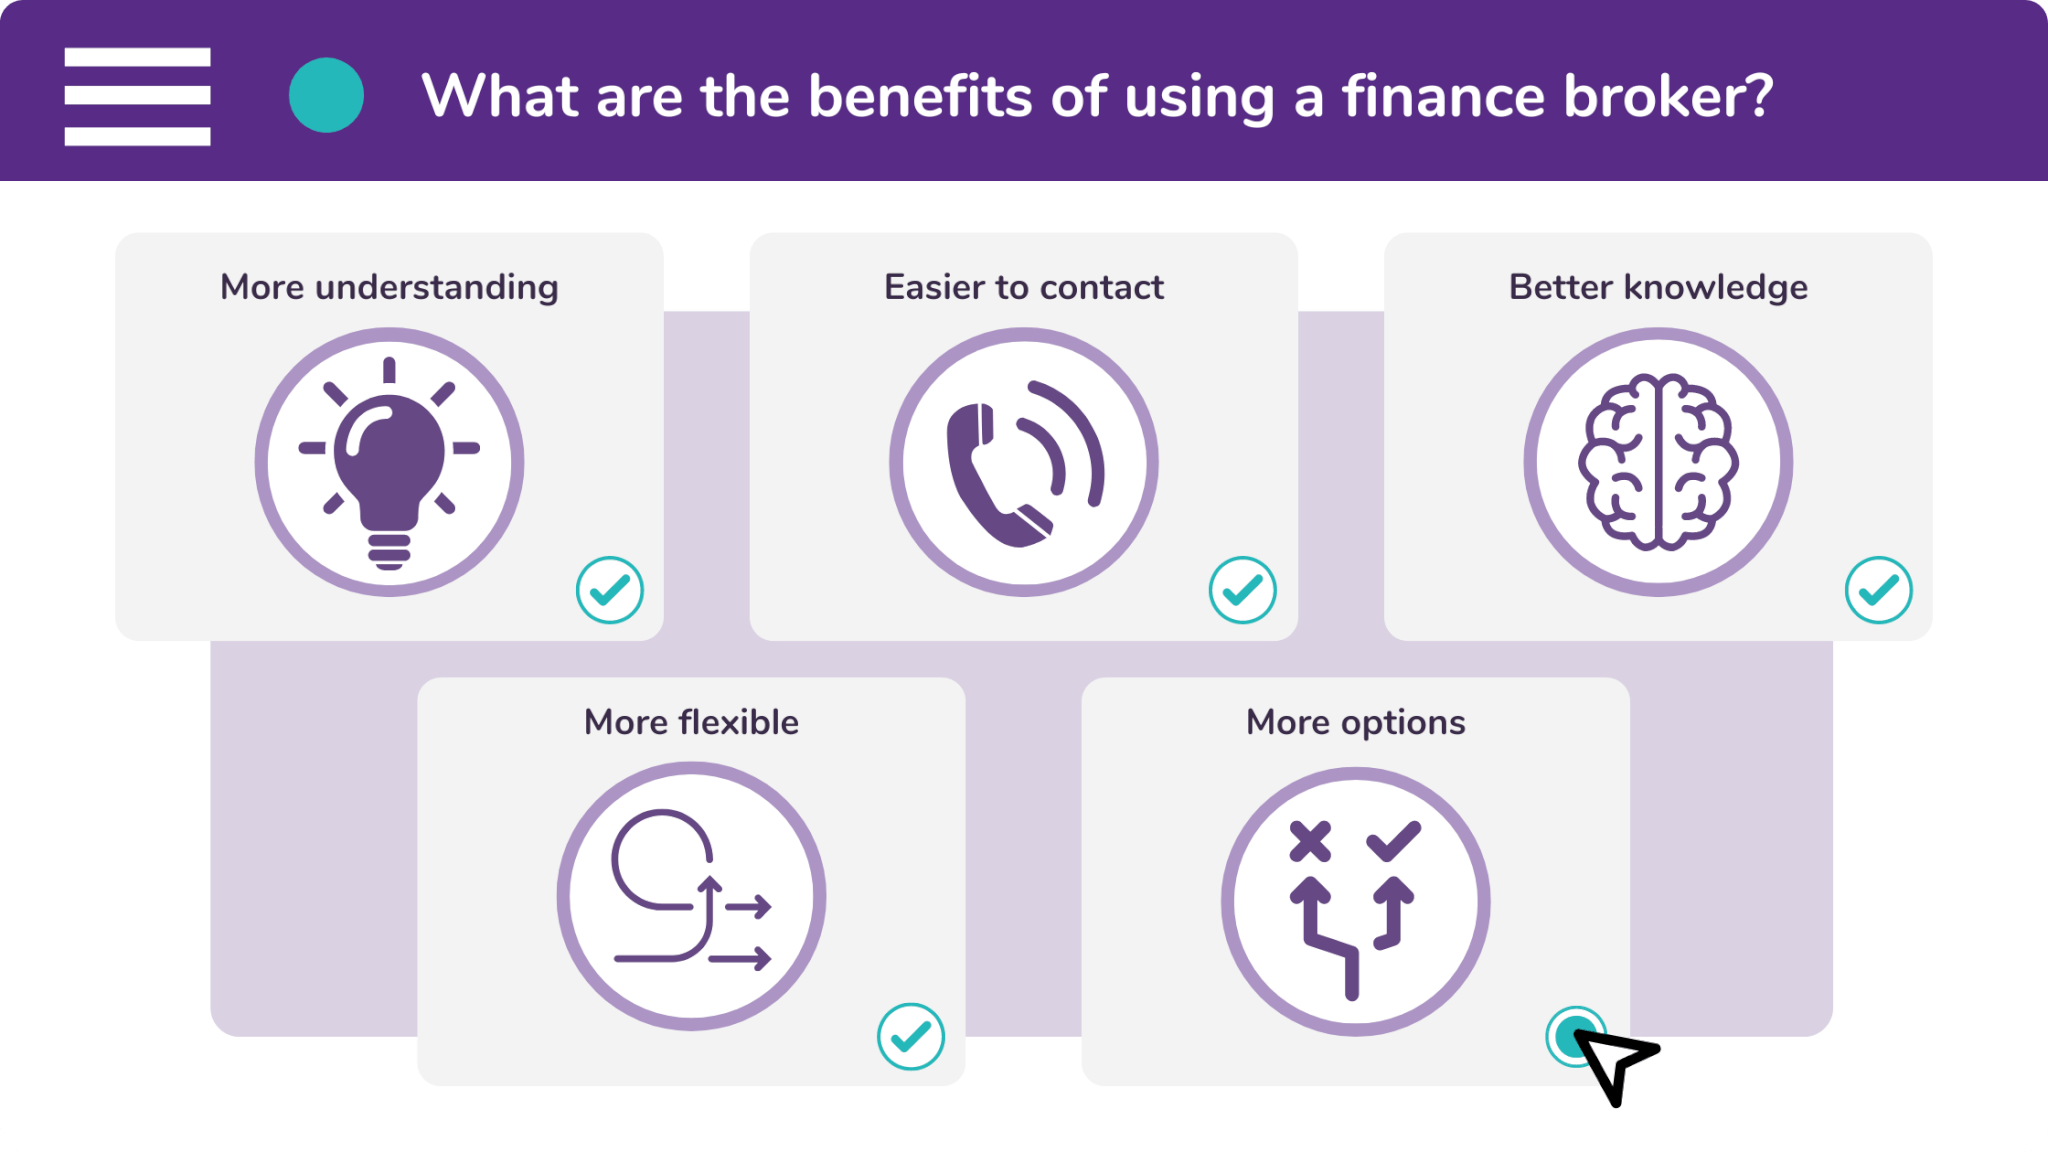 There are five main benefits to using a finance broker for your business's funding needs.